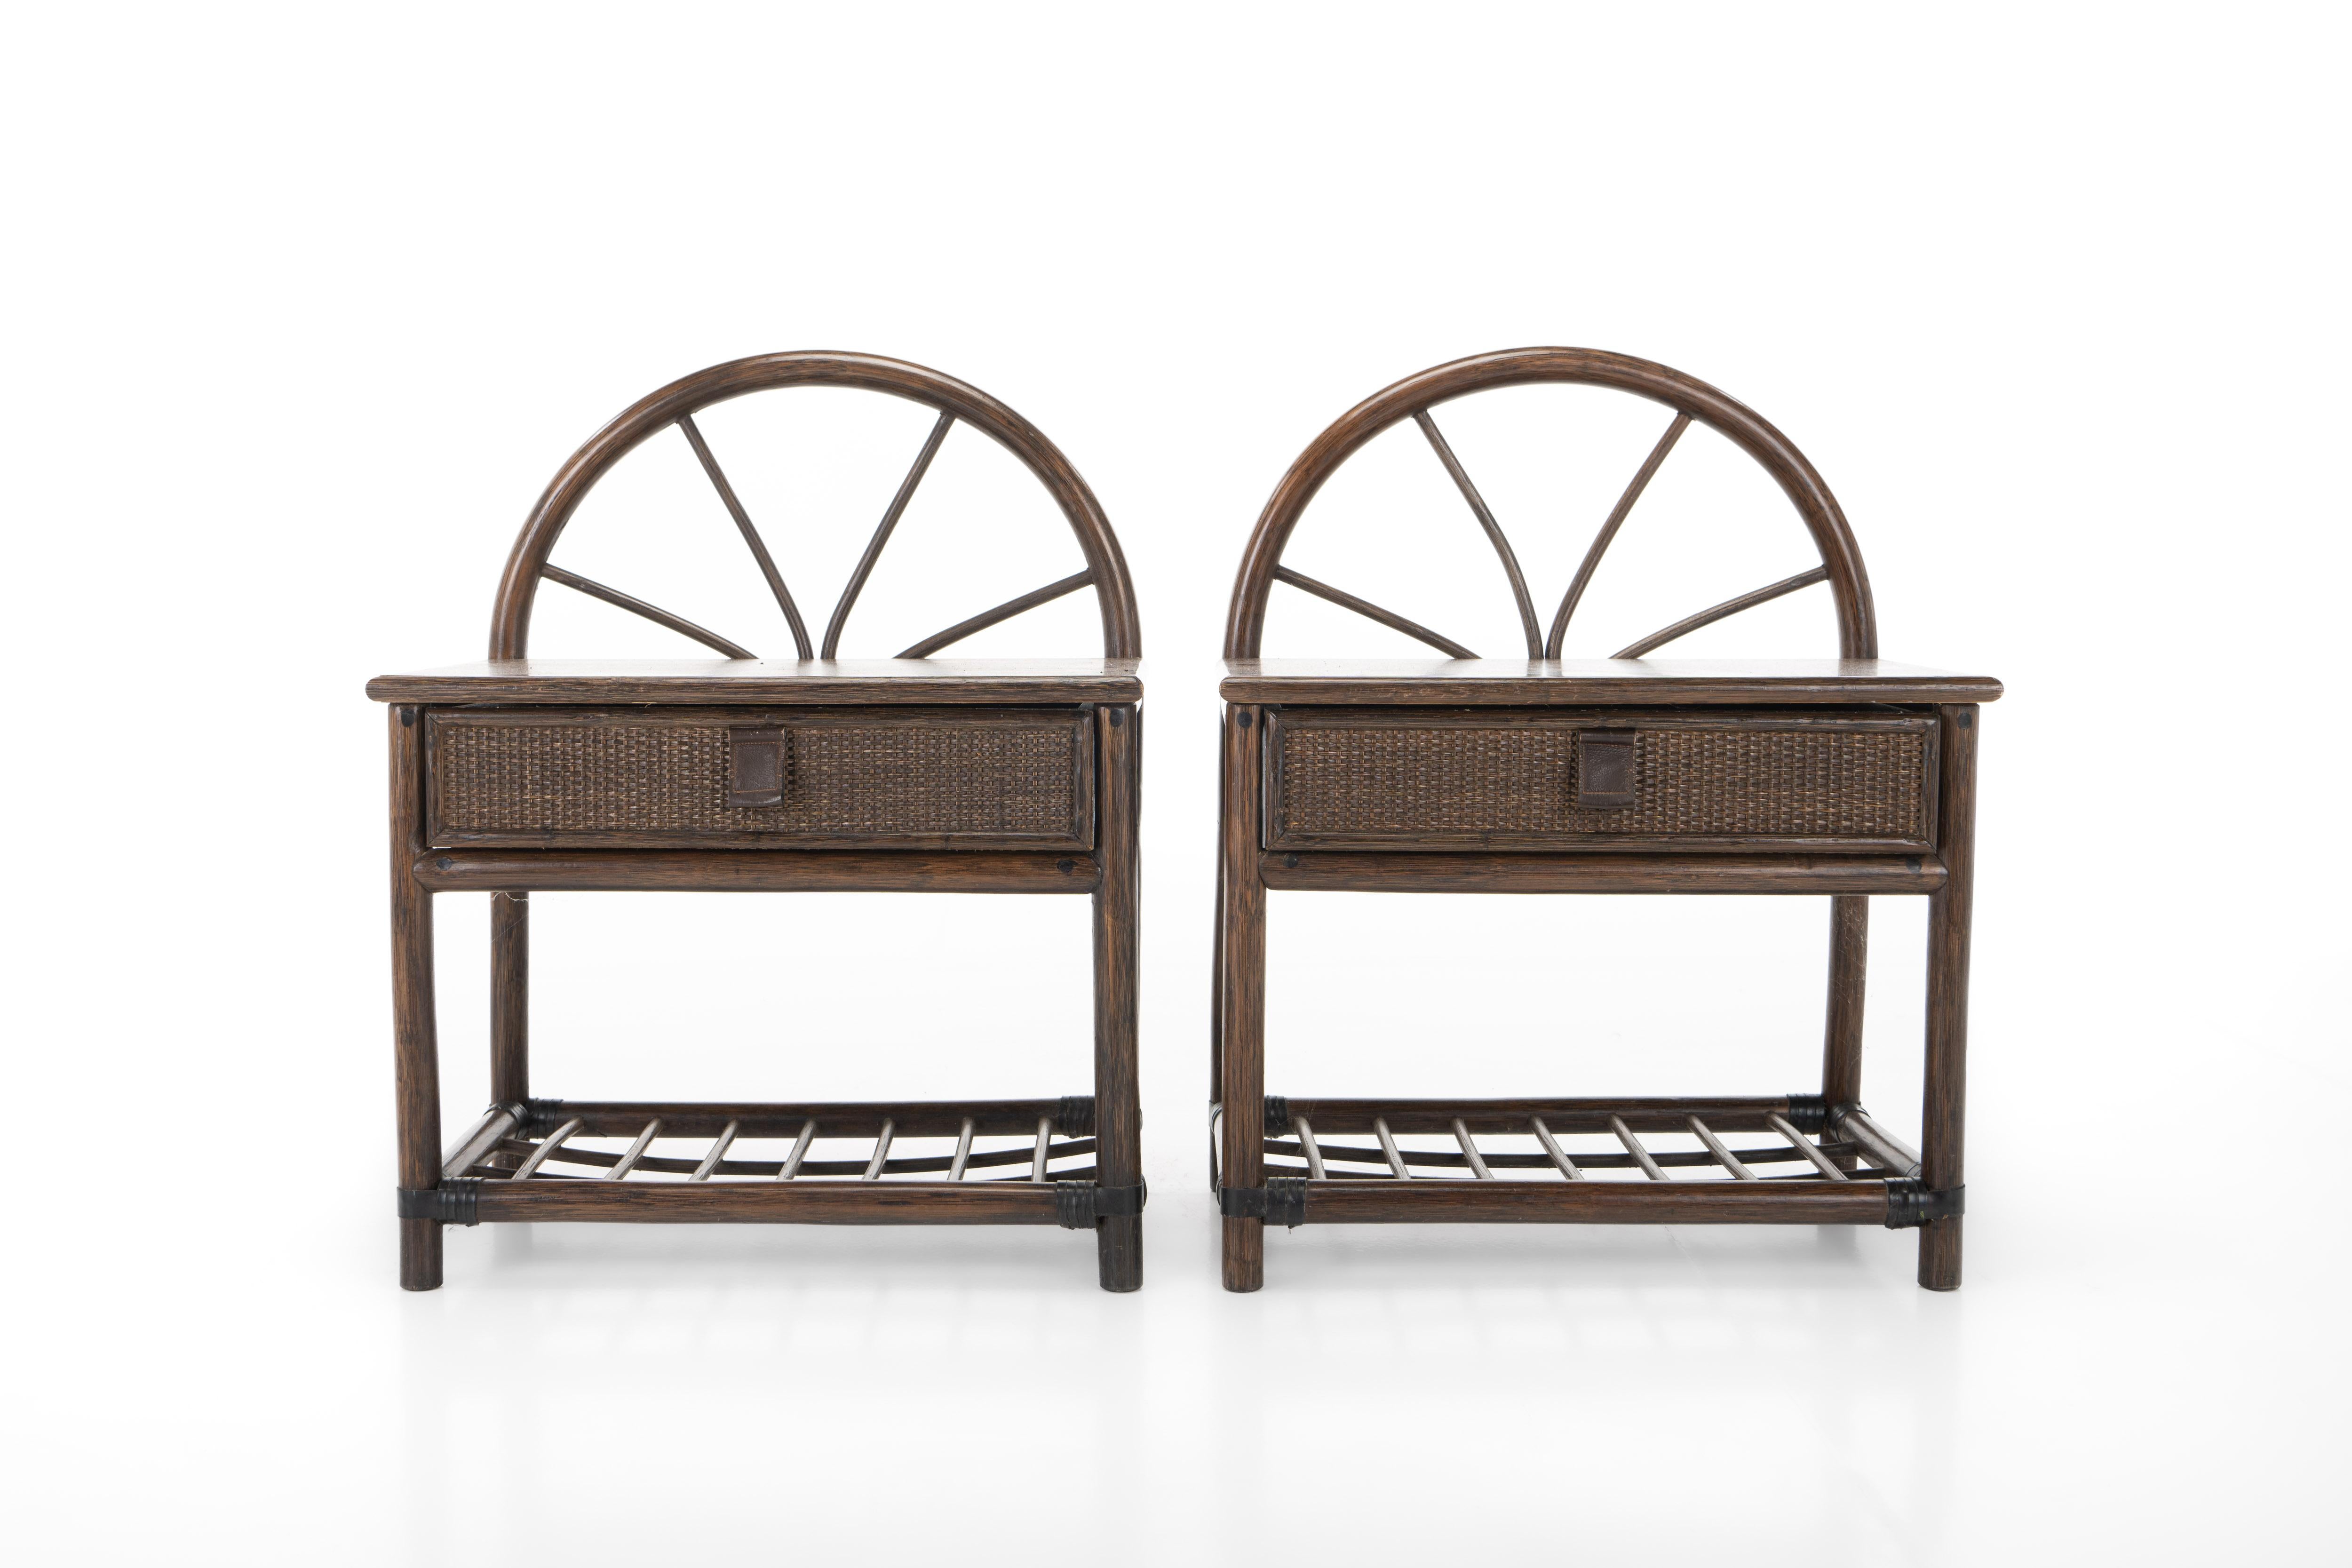 Bohemian Set of 2 Bedside Tables in Bamboo and Rattan, 1970s For Sale